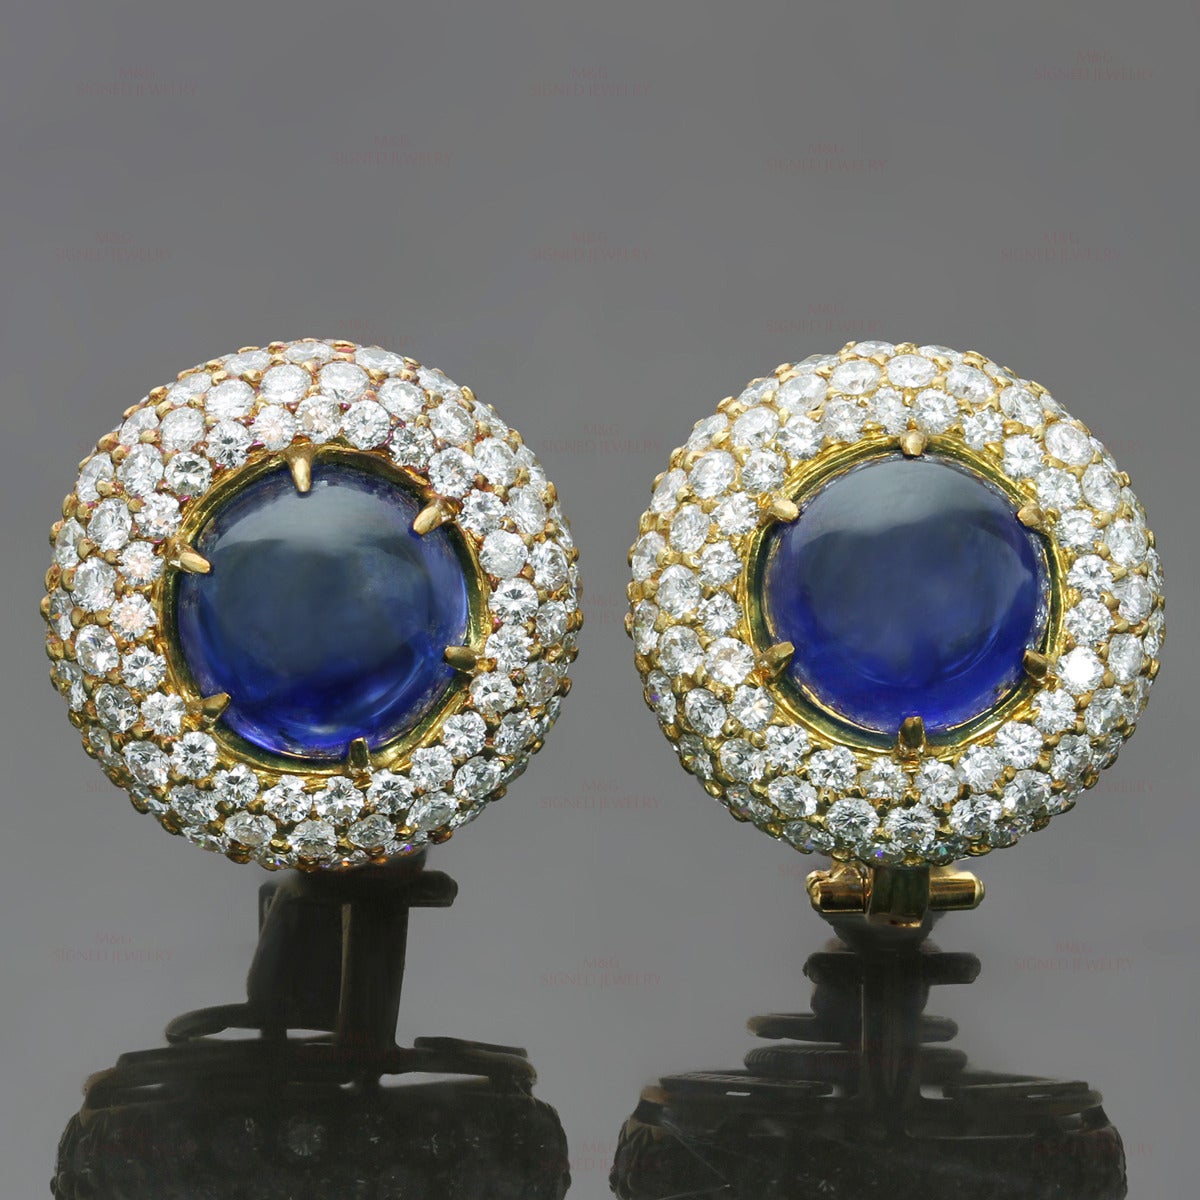 These splendid Harry Winston earrings ares made in 18k yellow gold and set with vivid blue round cabochon sapphires of an estimated 11 carats surrounded by brilliant-cut round F-G VVS2-VS1 diamonds of an estimated 5.75 carats. Made in United States